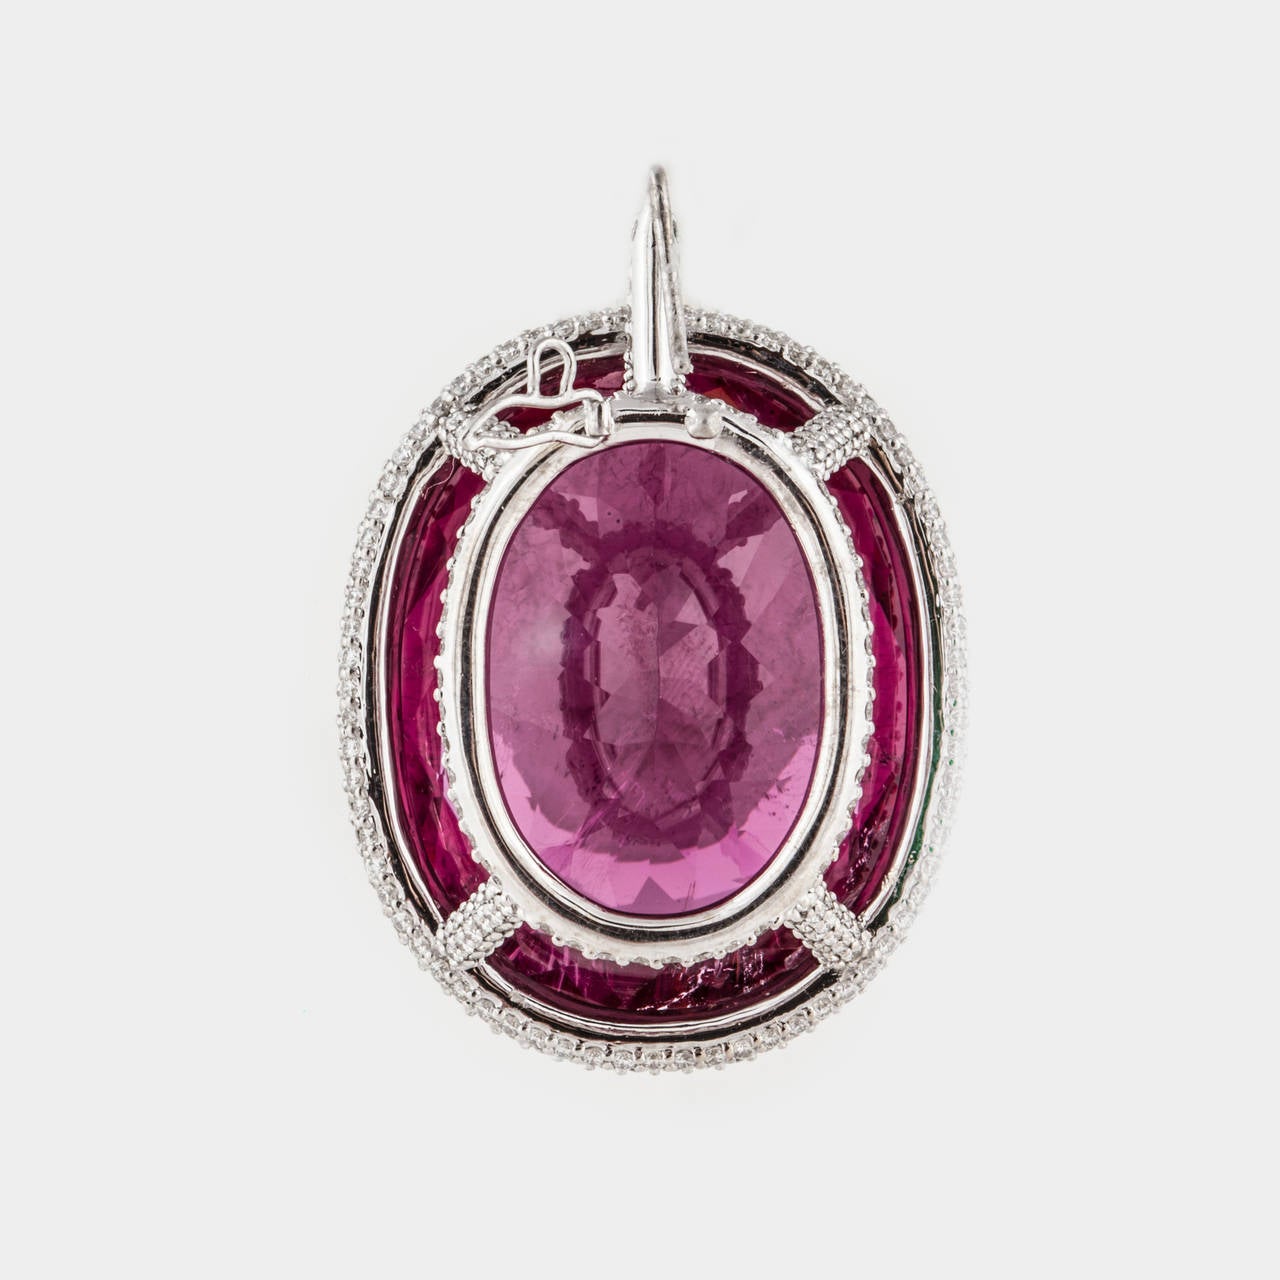 Pendant composed of 18K white gold featuring a spectacular 53.28 carat oval shaped rubellite framed by 357 round diamonds.  The diamonds total 2.90 carats; G-H color and VS1-VS2 clarity.   Measures 1 3/16 inches long, 7/8 inches wide and 1/2 inch